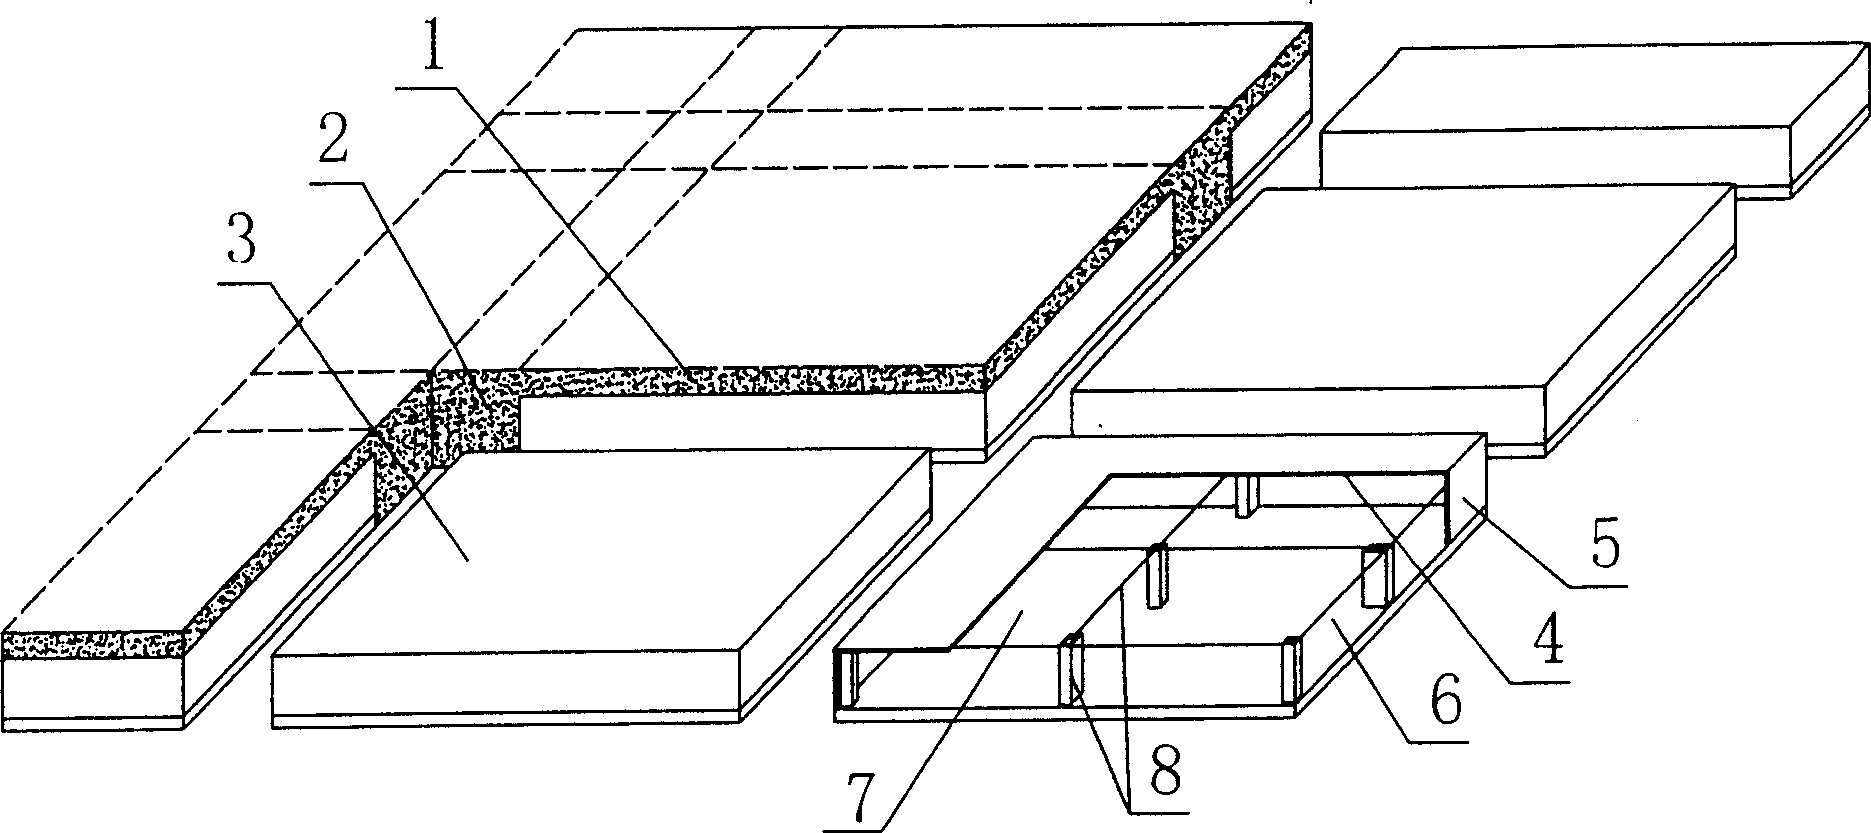 Reinforced concrete three-dimensional bearing structure floor